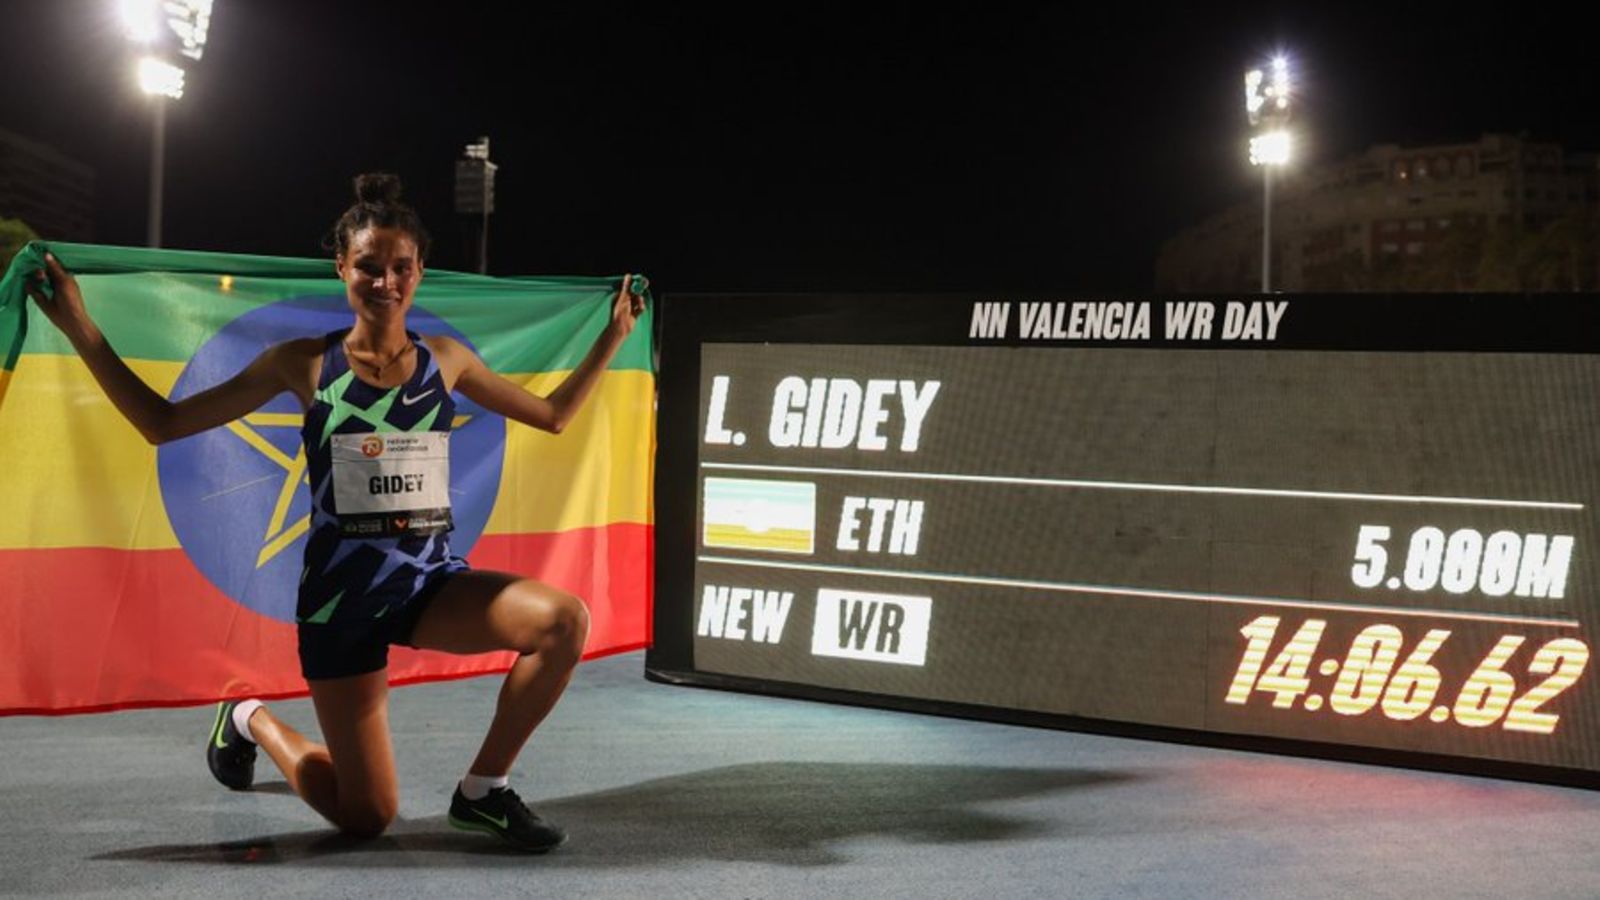 Dutch runner Sifan Hassan smashes women's 10,000 metres world record